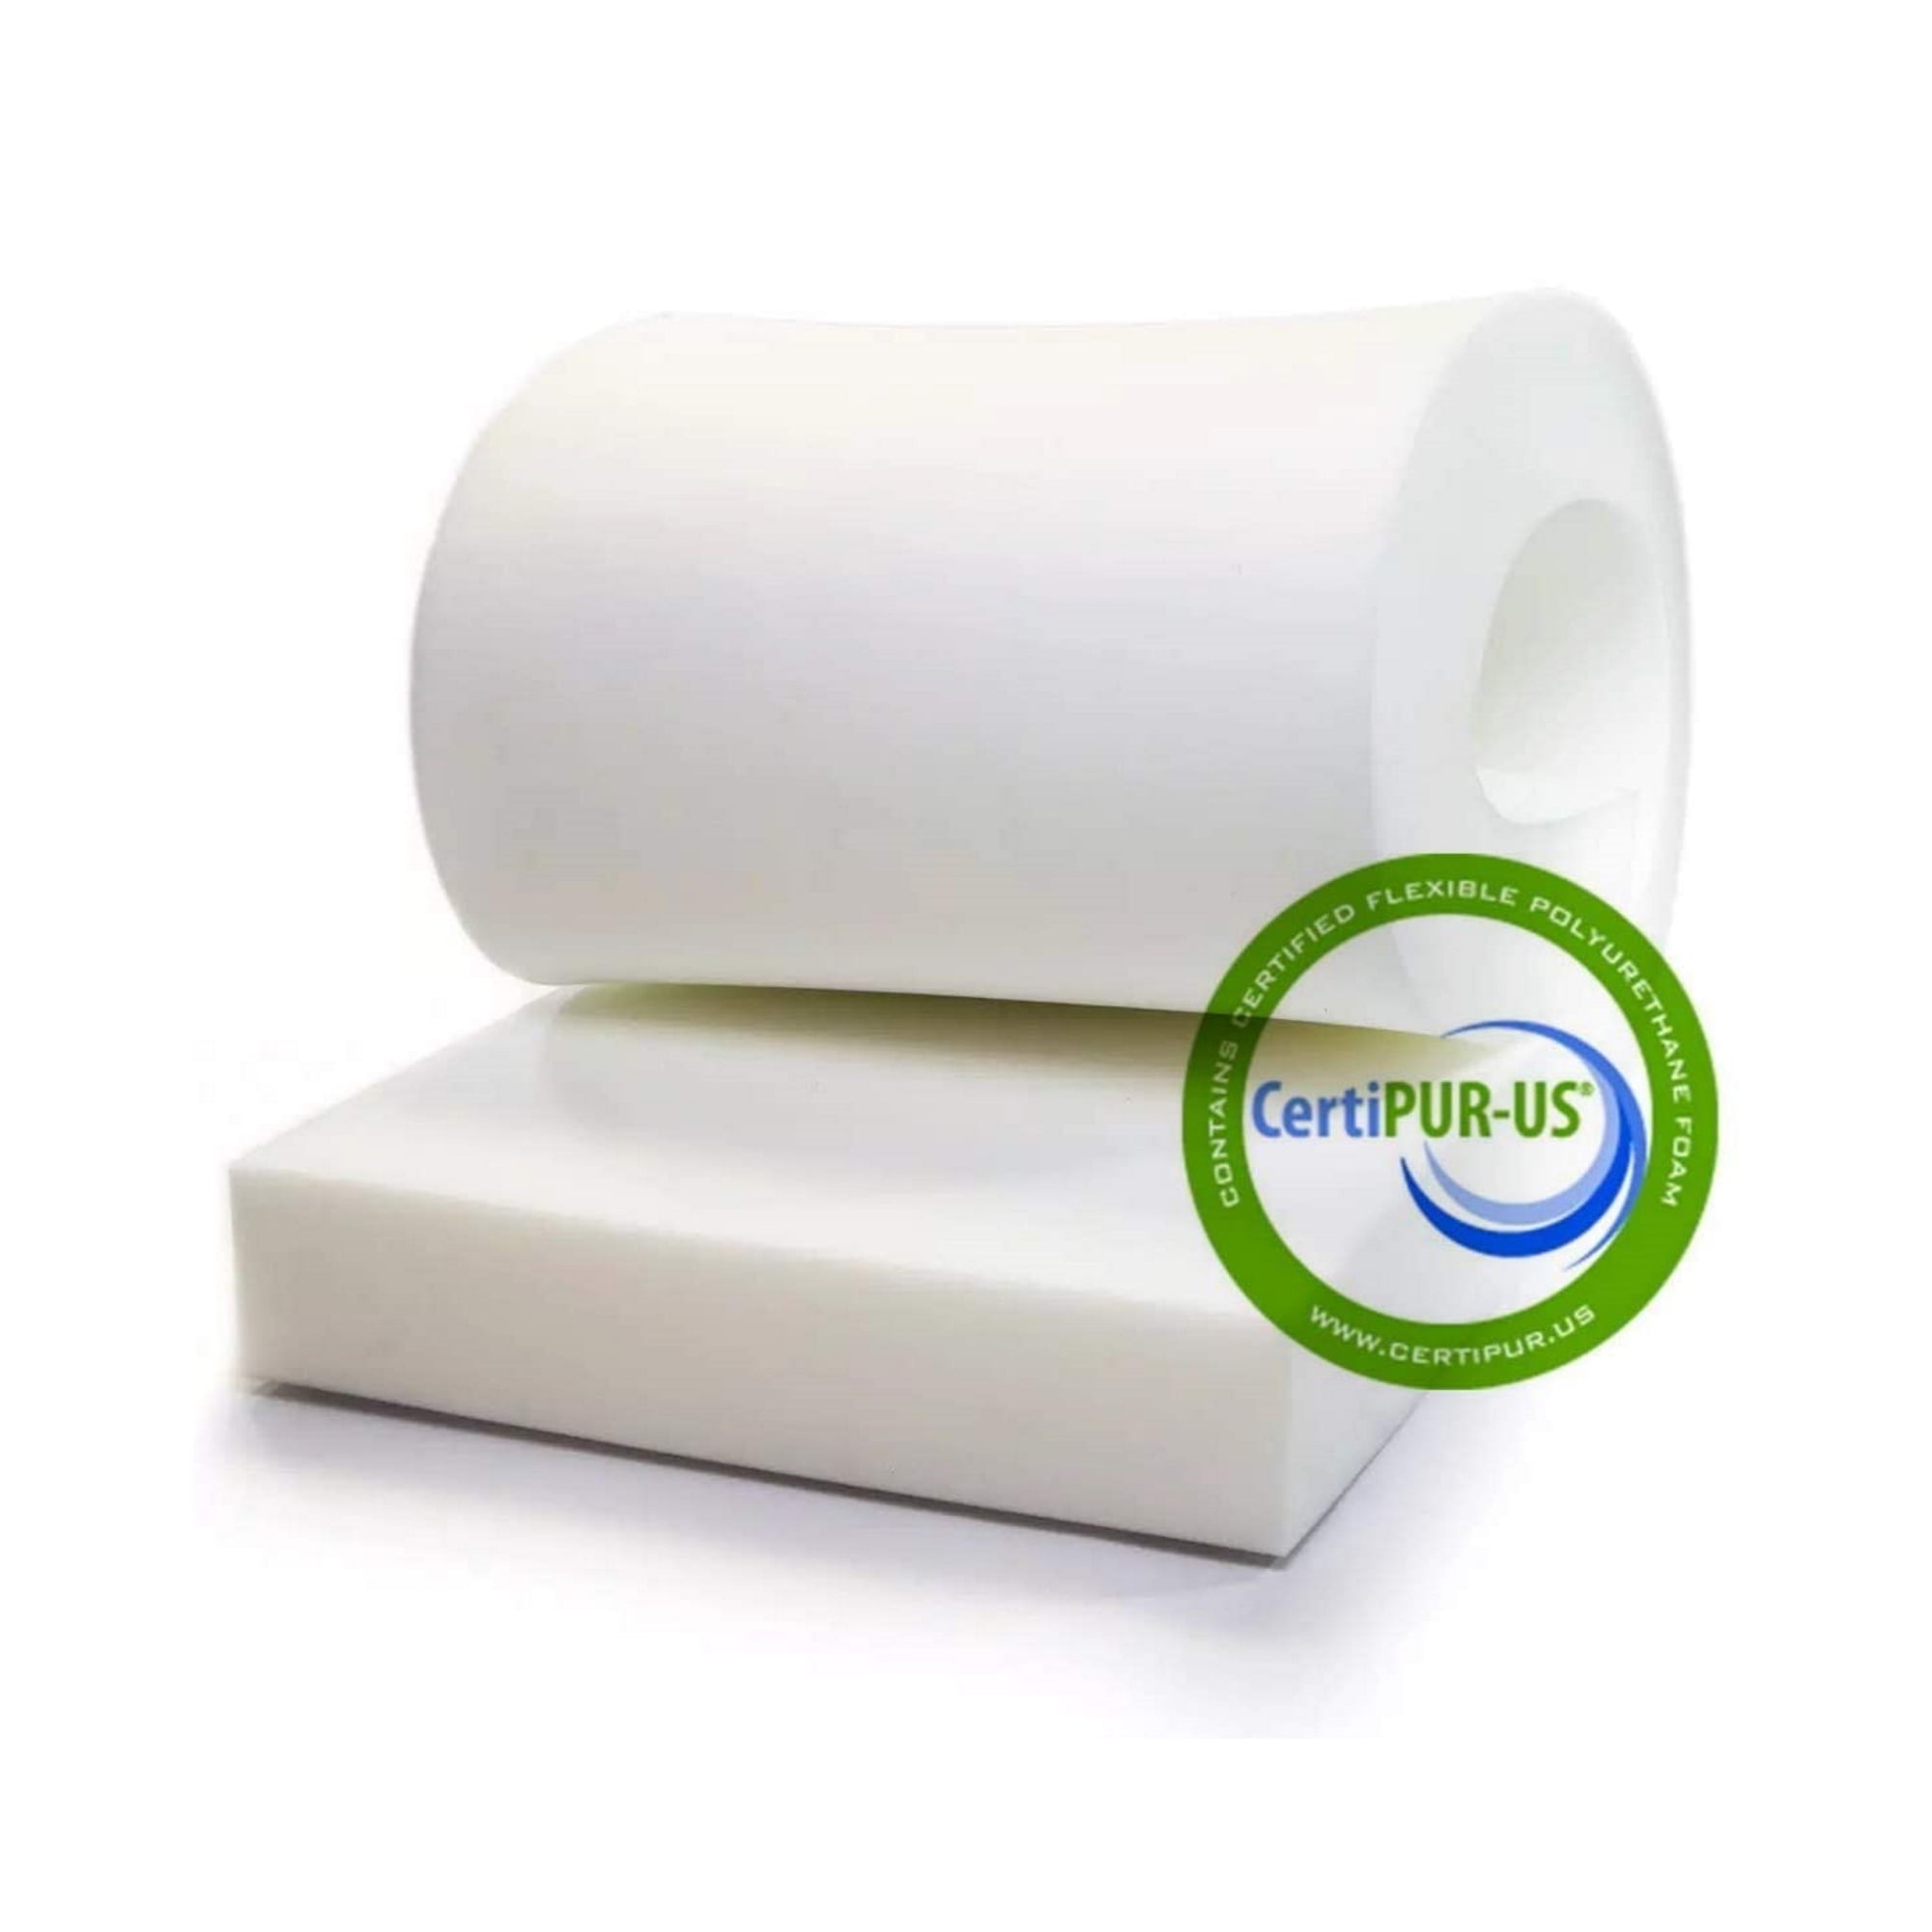 Foamy Foam High Density 5 inch Thick, 24 inch Wide, 24 inch Long Upholstery  Foam, Cushion Replacement